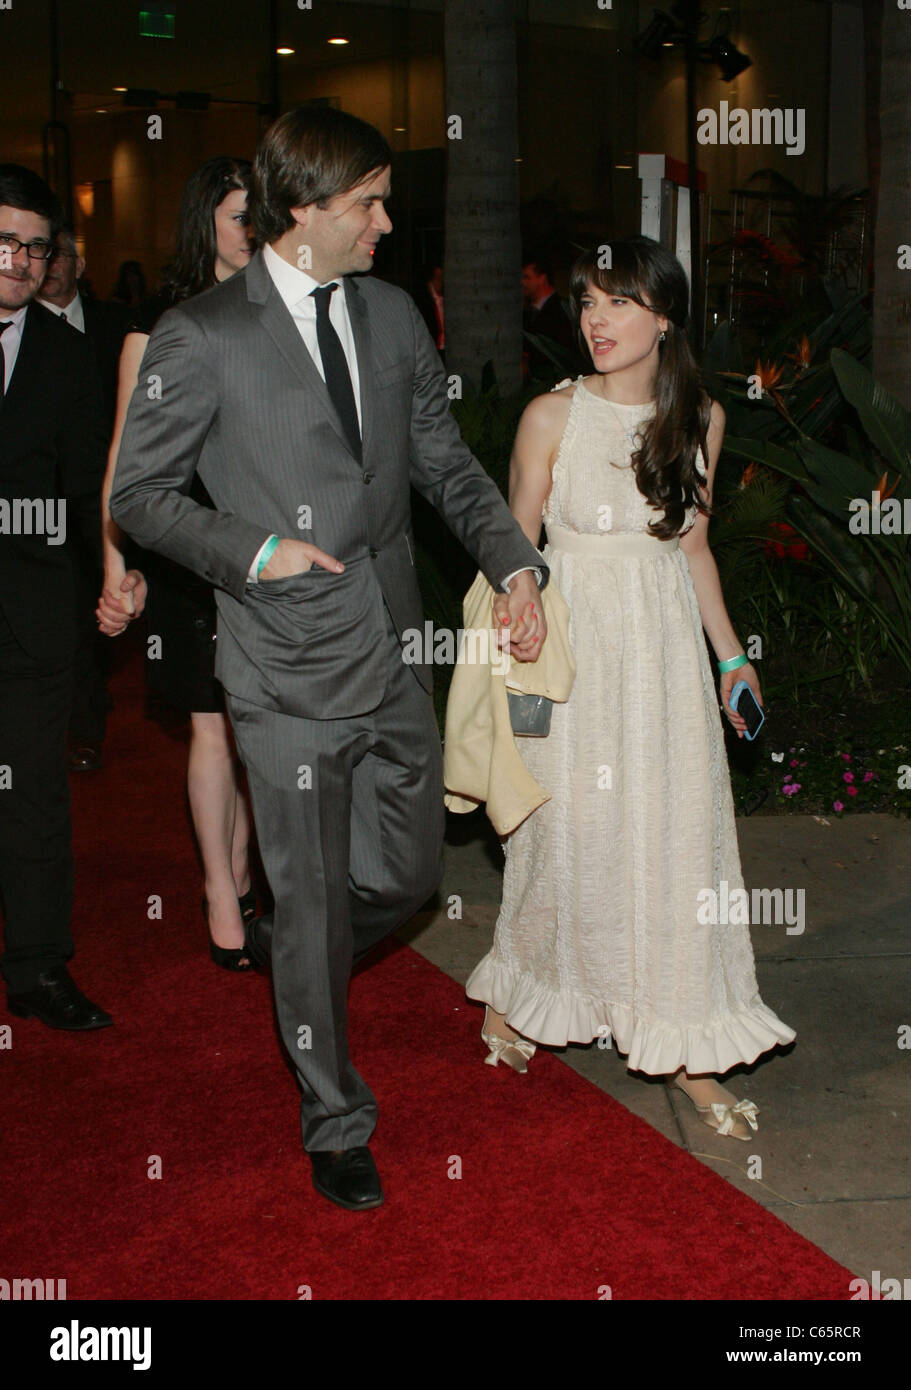 Ben Gibbard, Zooey Deschanel at departures for 68th Annual Golden Globe Awards, Beverly Hilton Hotel, Beverly Hills, CA January Stock Photo